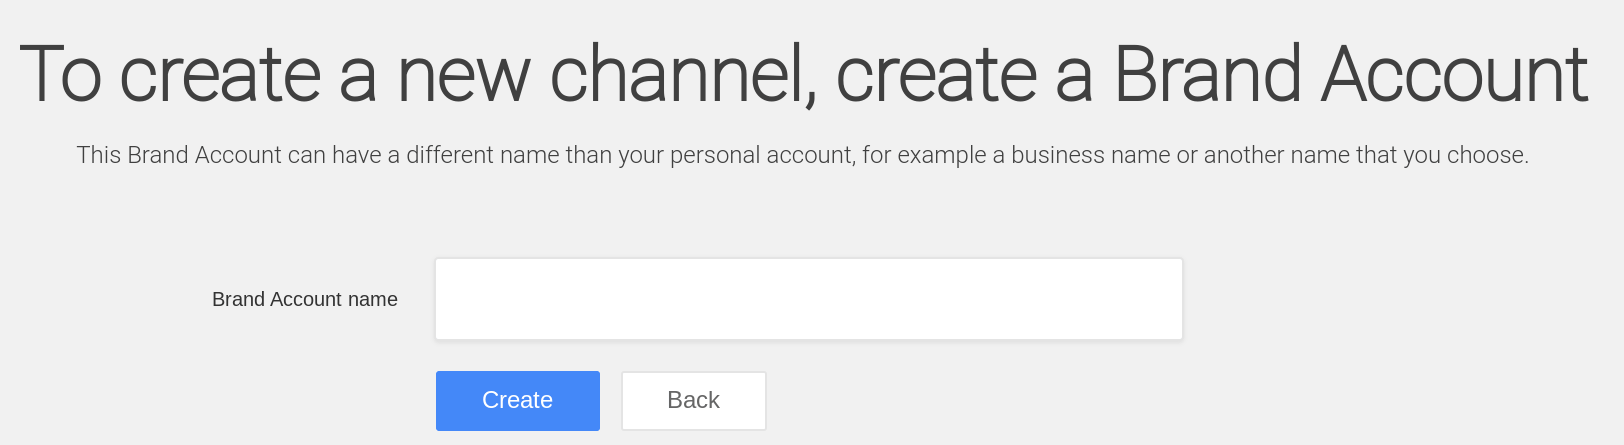 Creating a brand account on YouTube.